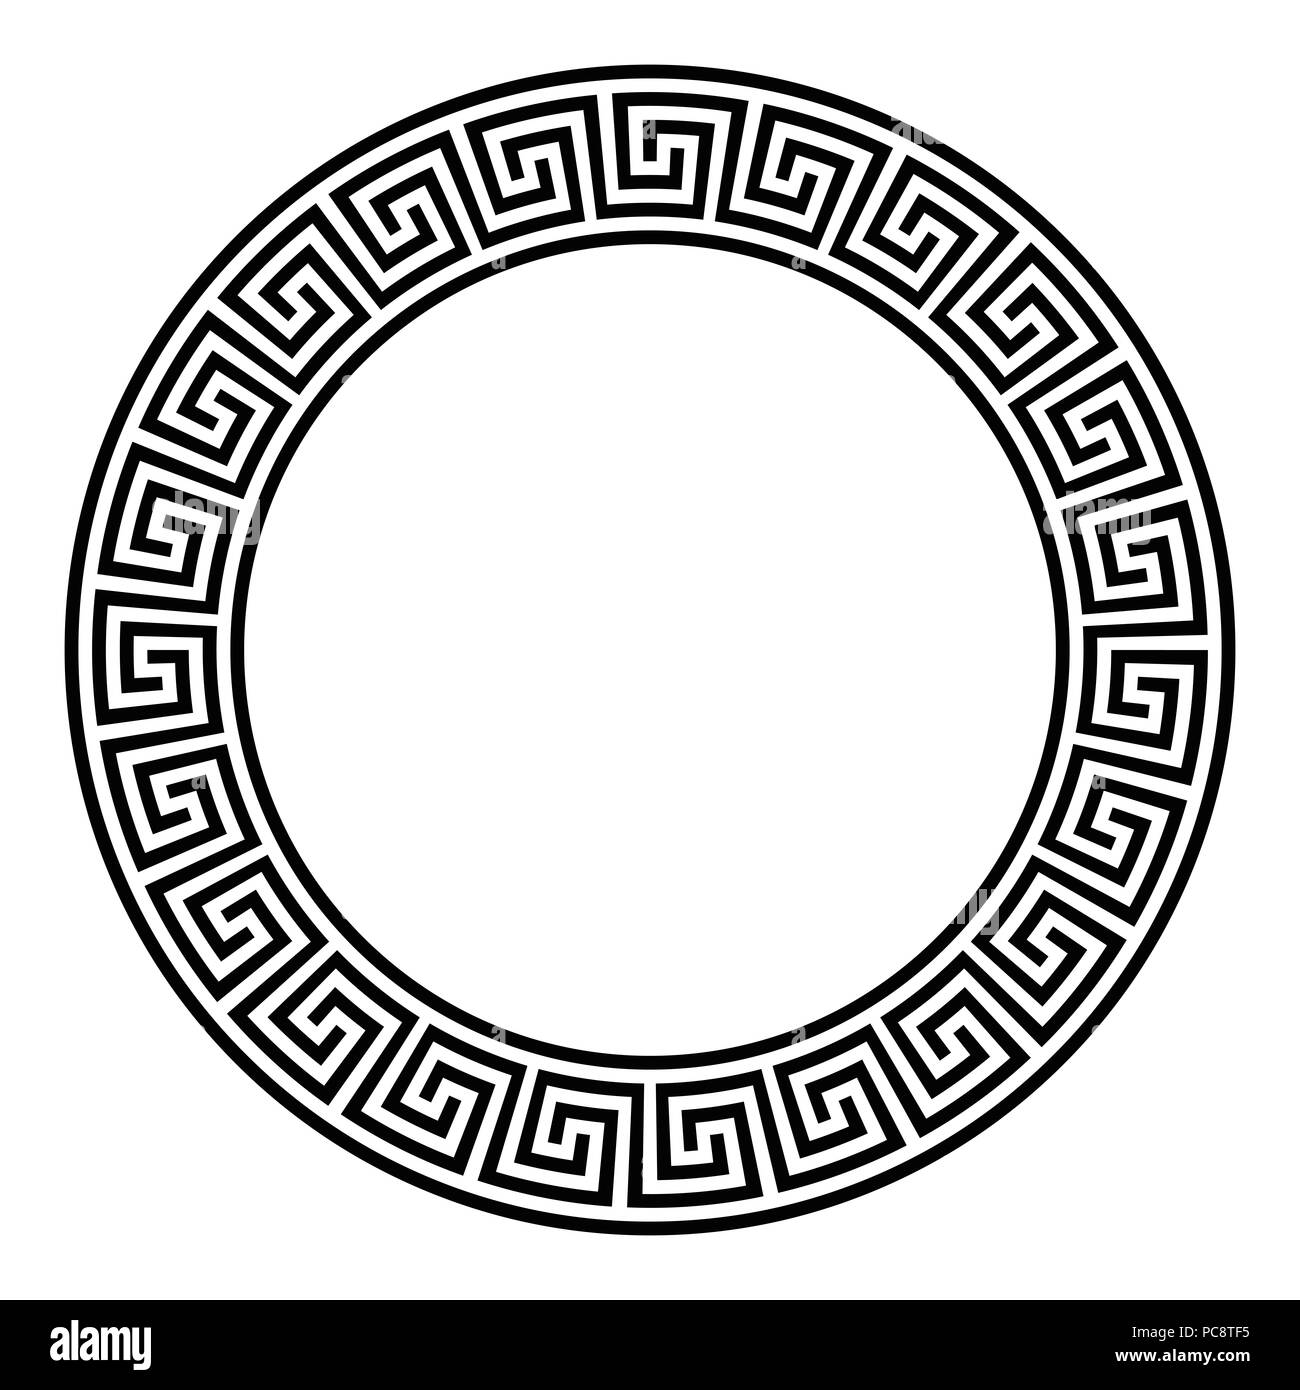 Circle frame with seamless disconnected meander pattern. Meandros, a decorative border, constructed from lines, shaped into a repeated motif. Stock Photo